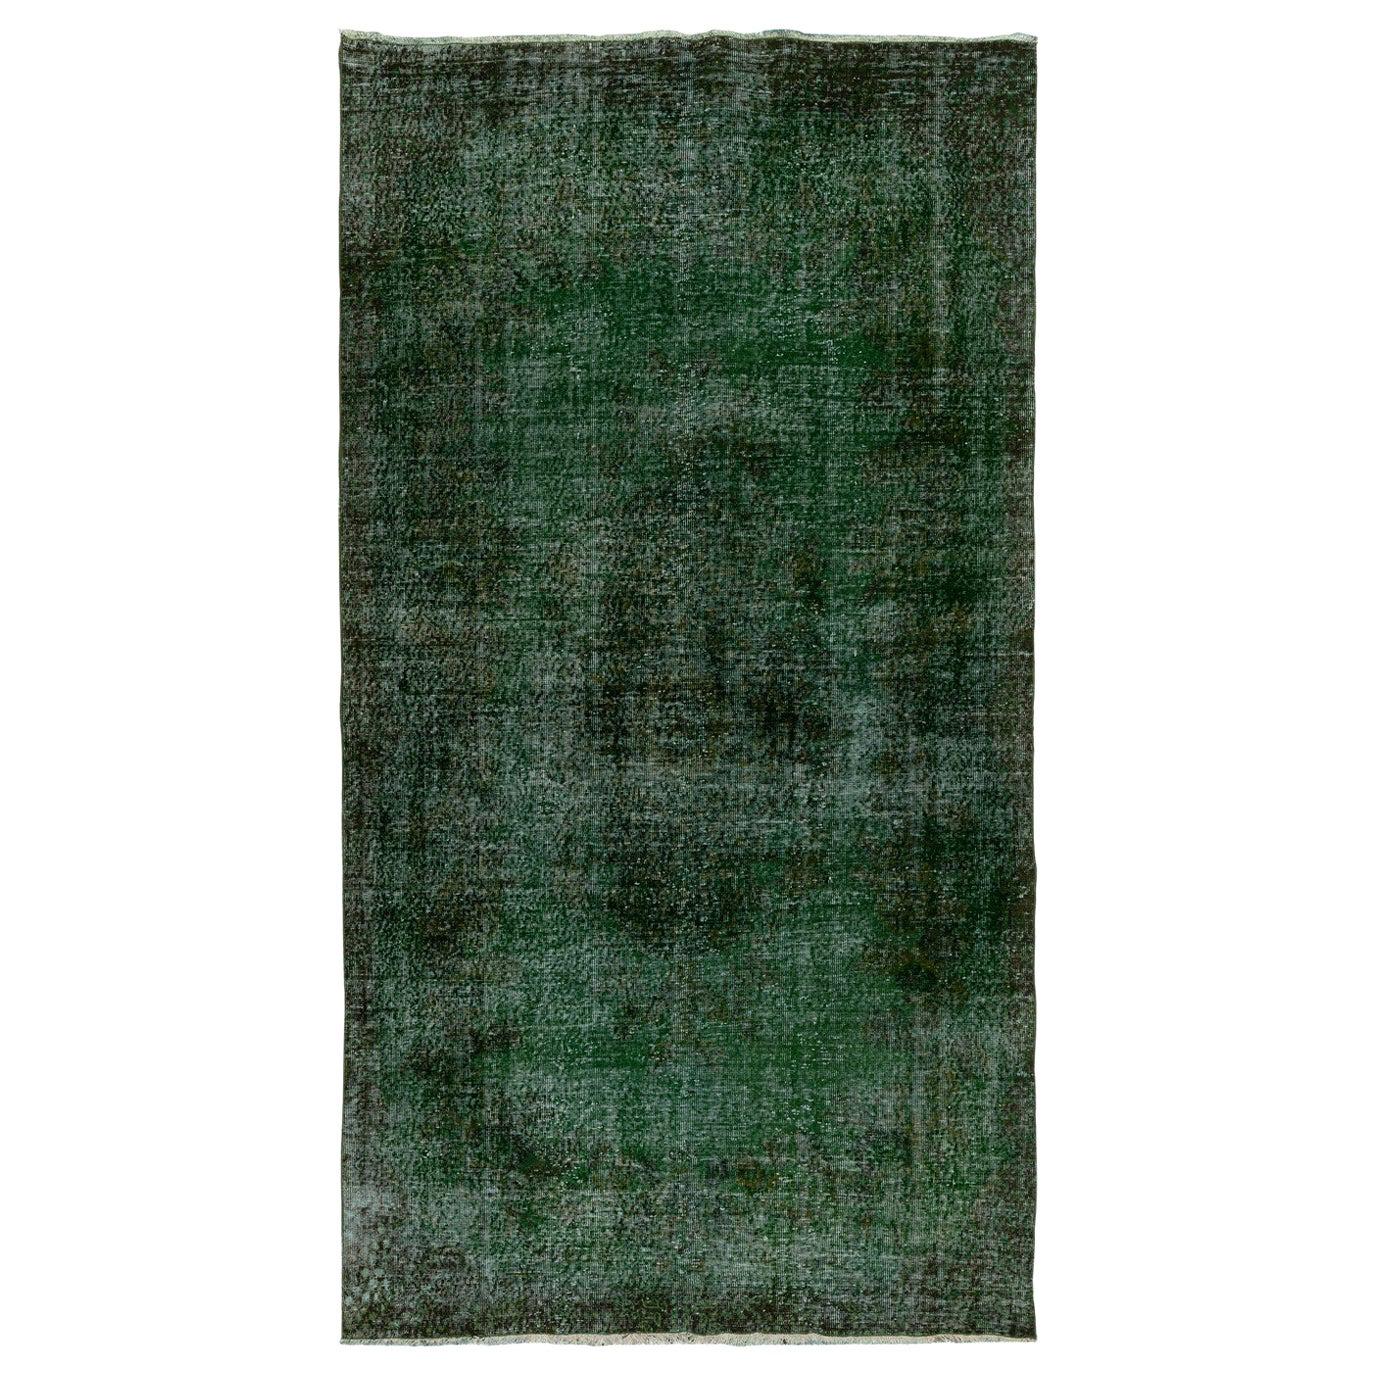 6x11 Ft Distressed Vintage Handmade Rug in Green Color. Modern Anatolian Carpet